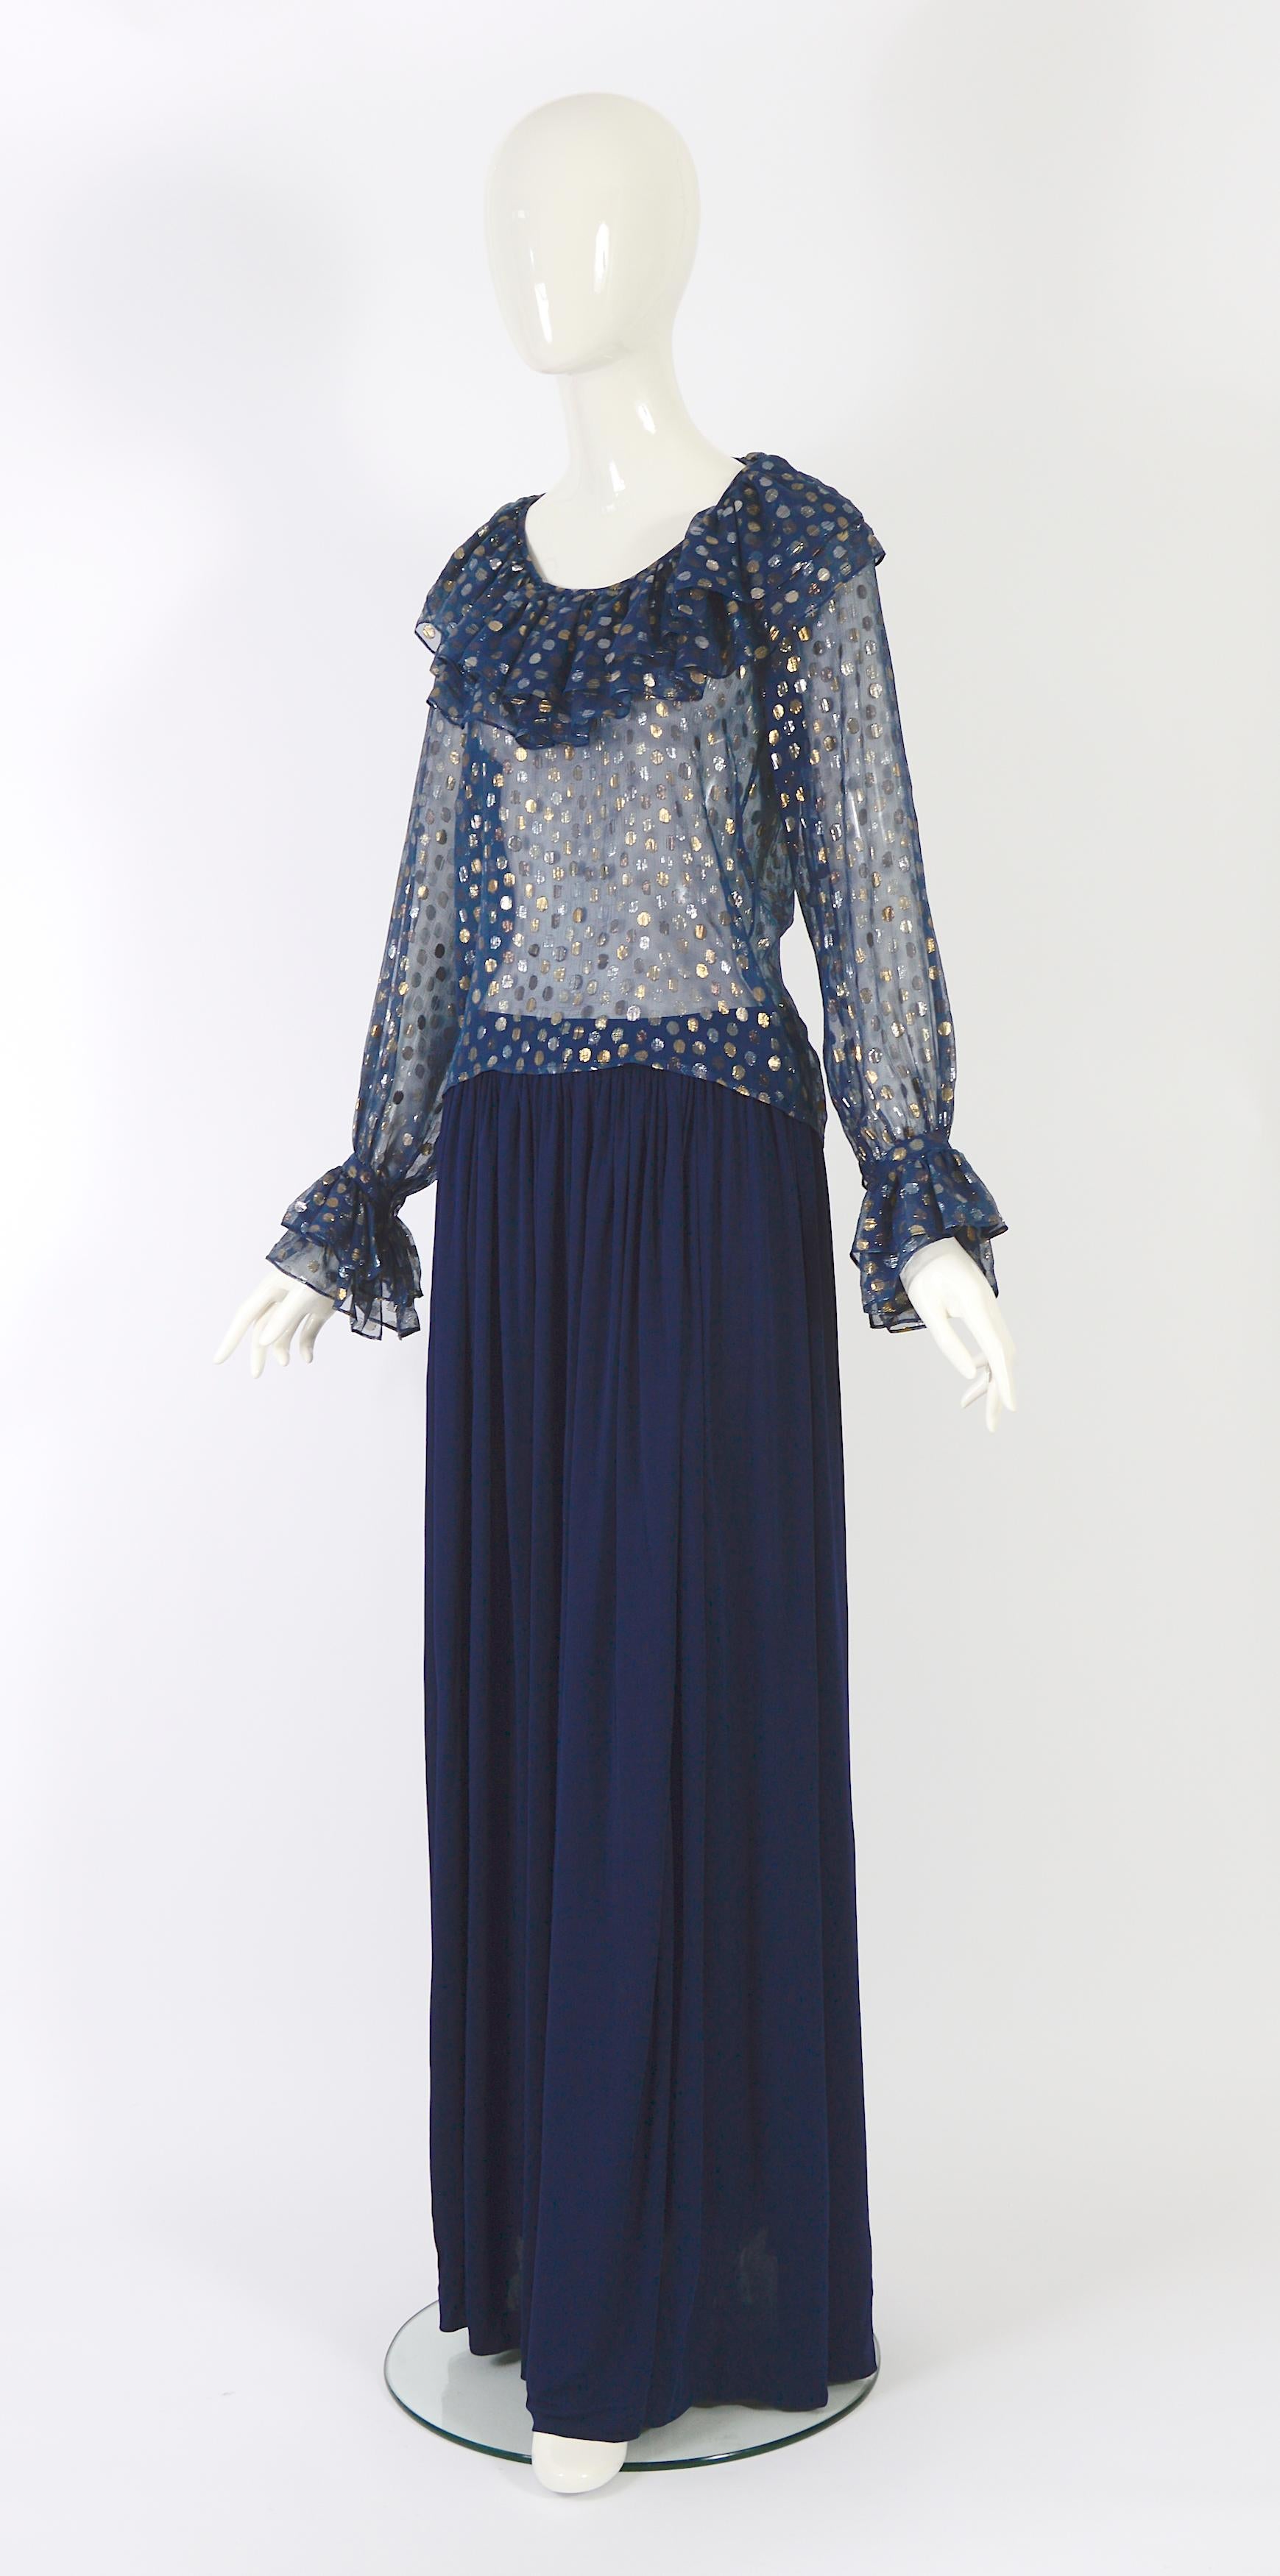 Yves Saint Laurent rive gauche 1970s blue chiffon metallic dot blouse and silk jersey skirt

The chiffon blouse features a metallic print of gold & silver dots, and blouson sleeves with layered ruffle detail at the wrists and neckline, a long blue